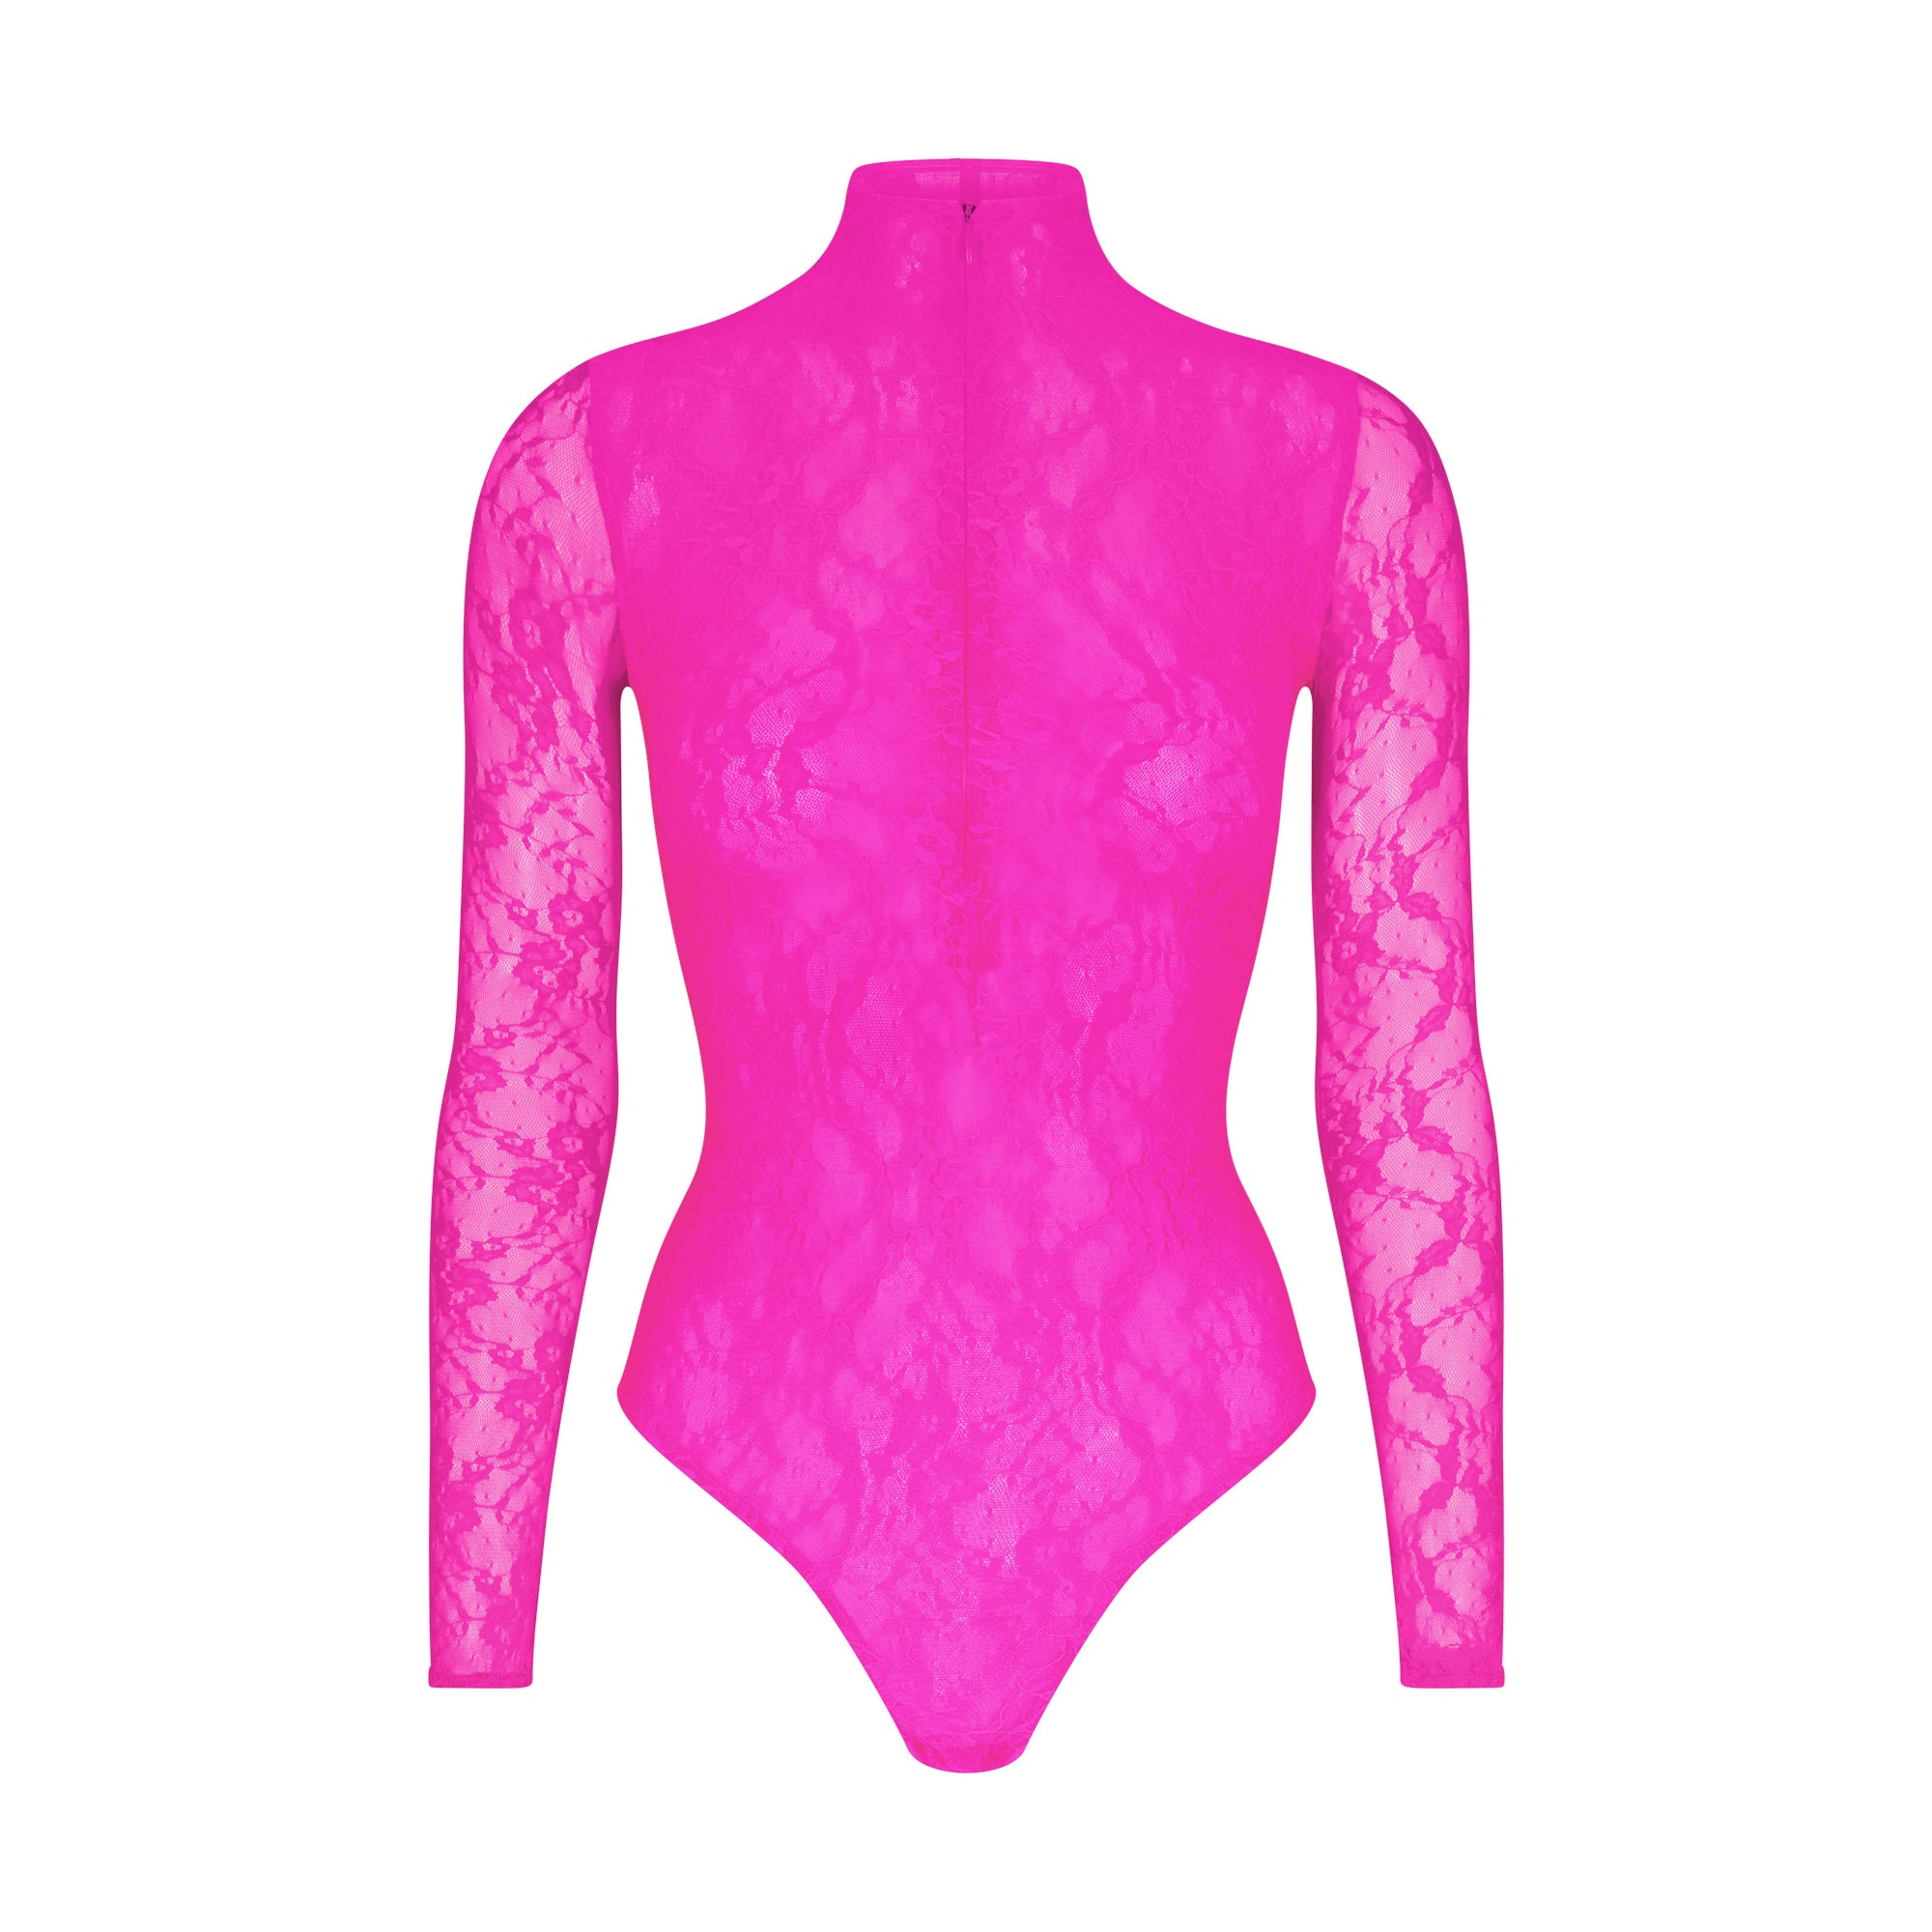 Track Stretch Lace Lined Long Sleeve Thong Bodysuit - Sunset - M at